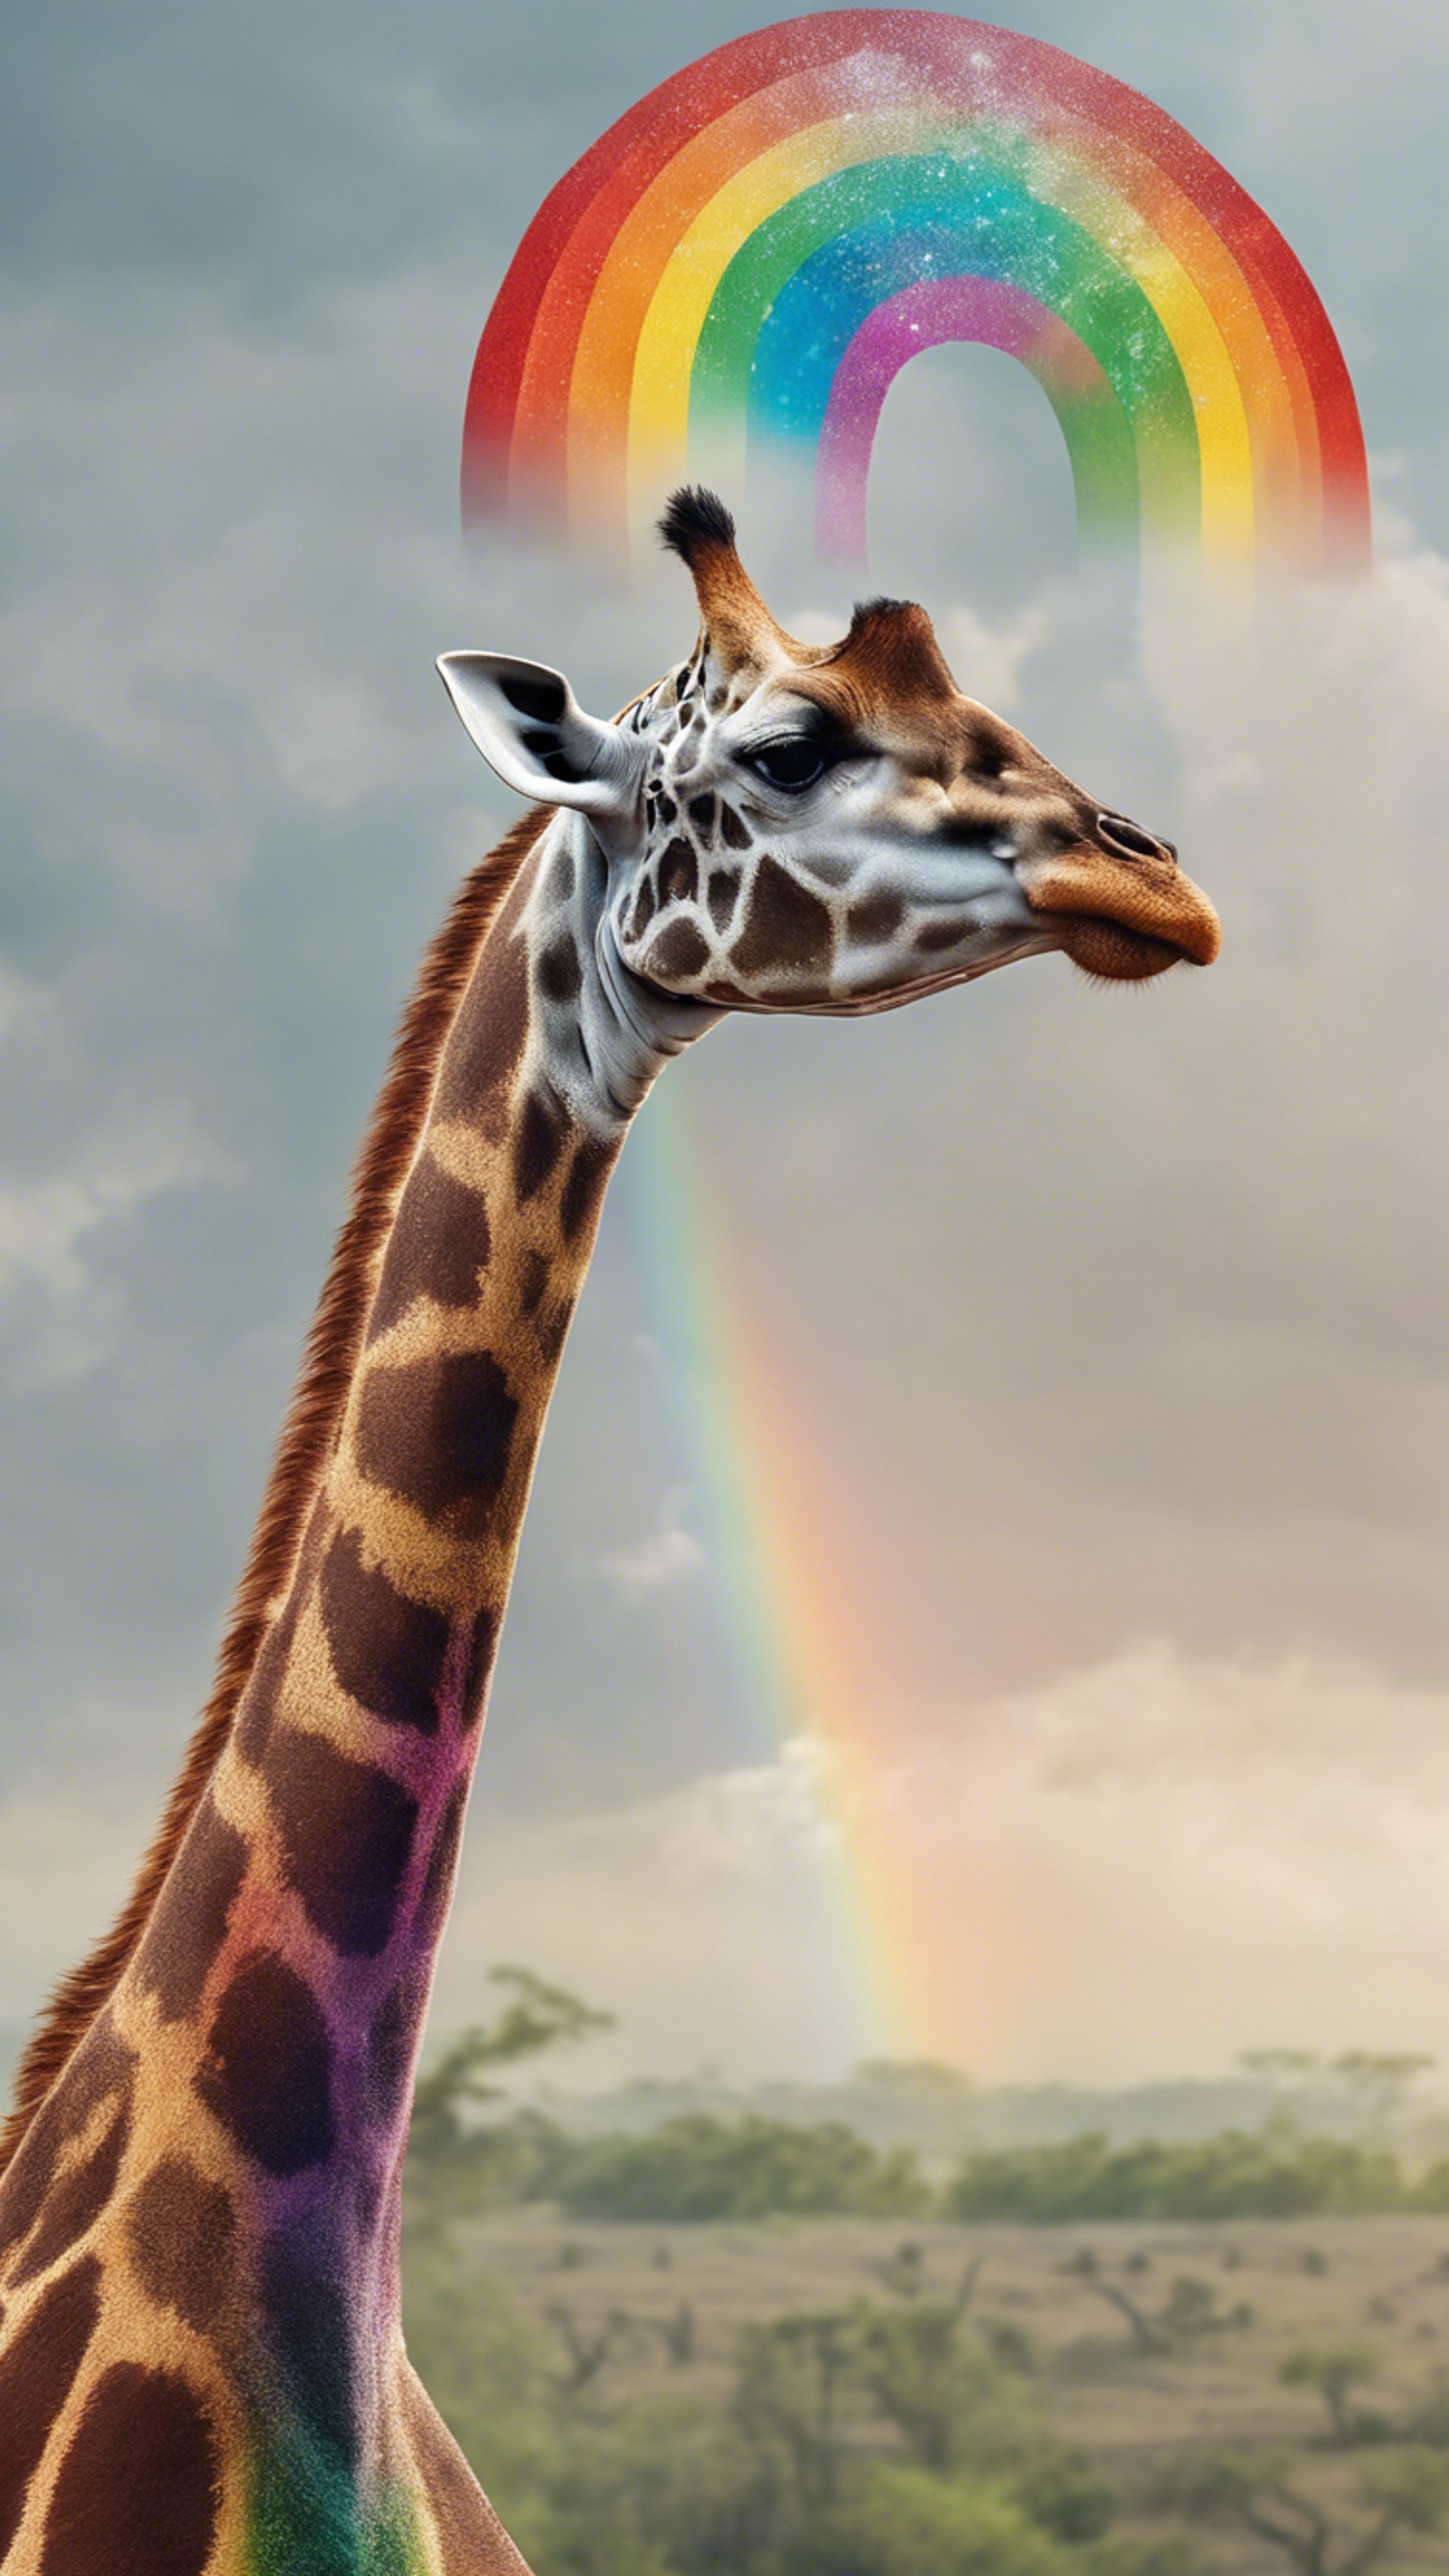 An imaginative picture of a giraffe with a rainbow-colored neck. Wallpaper[4d15f49dcf6345a58af5]